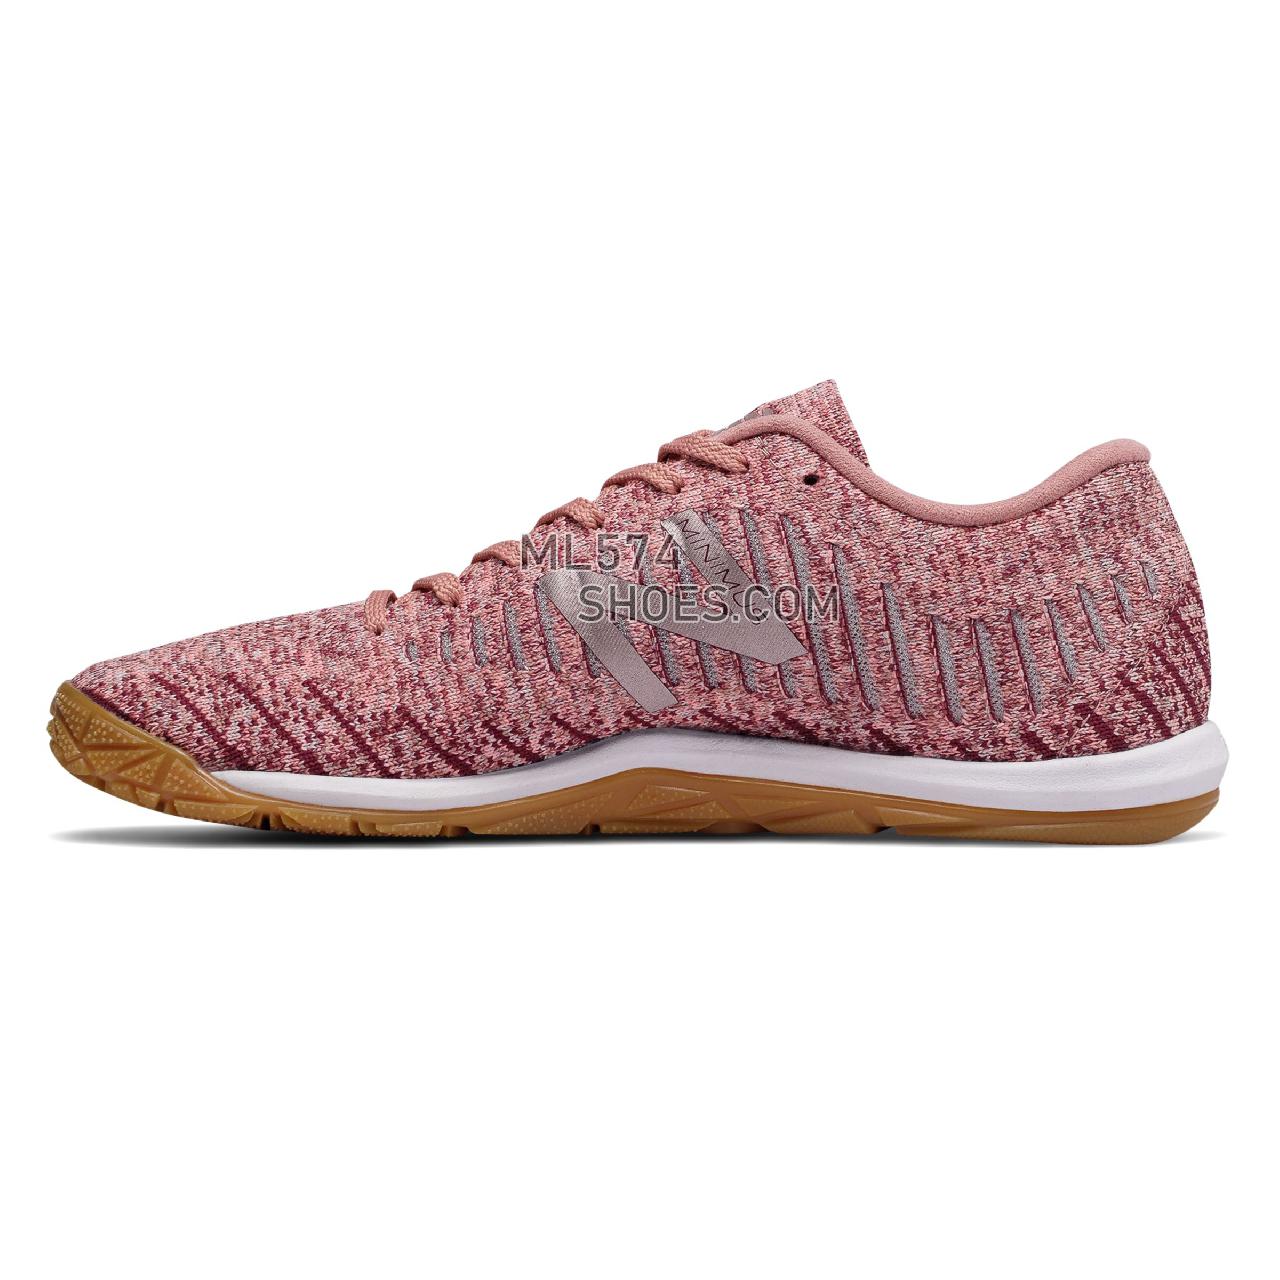 New Balance Minimus 20v7 Trainer - Women's 20 - X-training Dusted Peach with Gum - WX20VS7